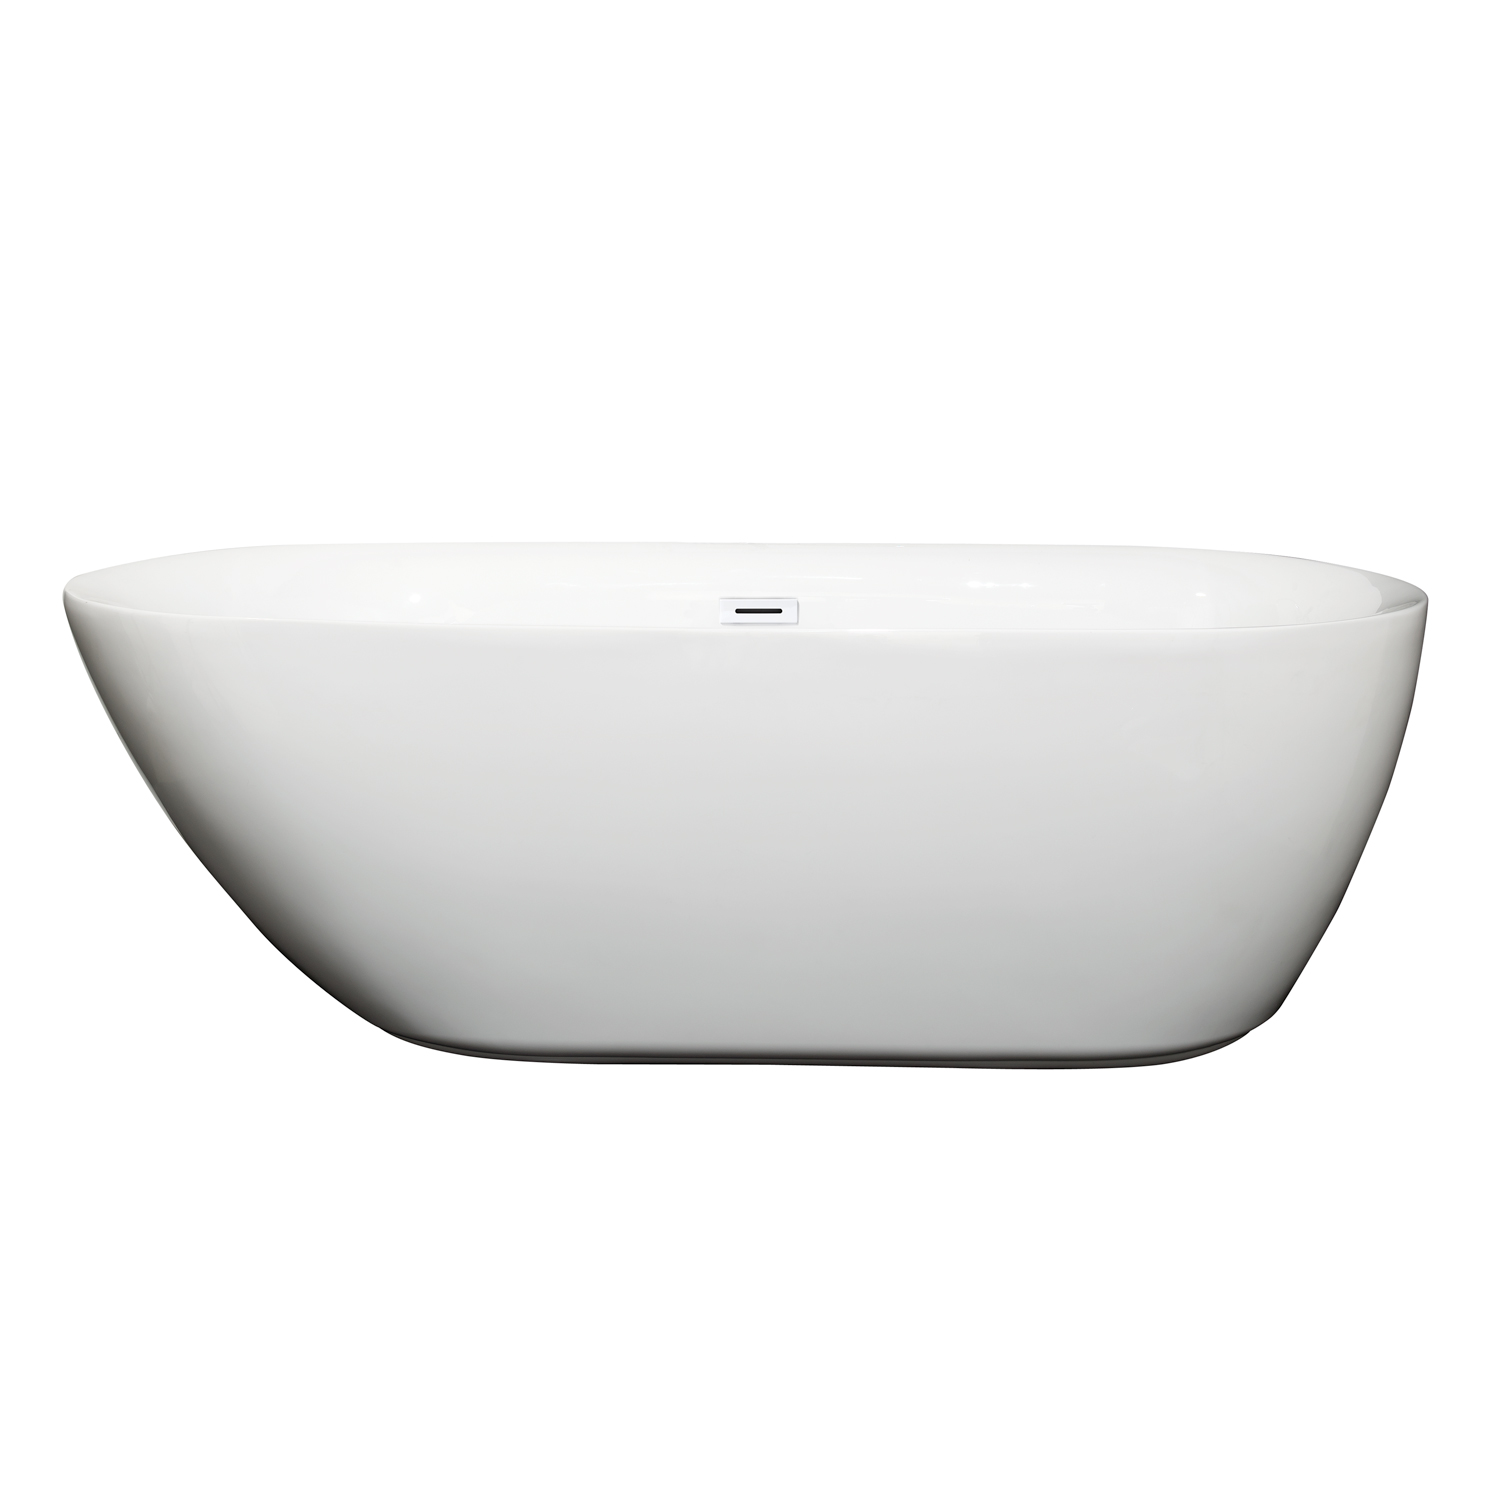 65" Freestanding Bathtub in White with Shiny White Drain and Overflow Trim